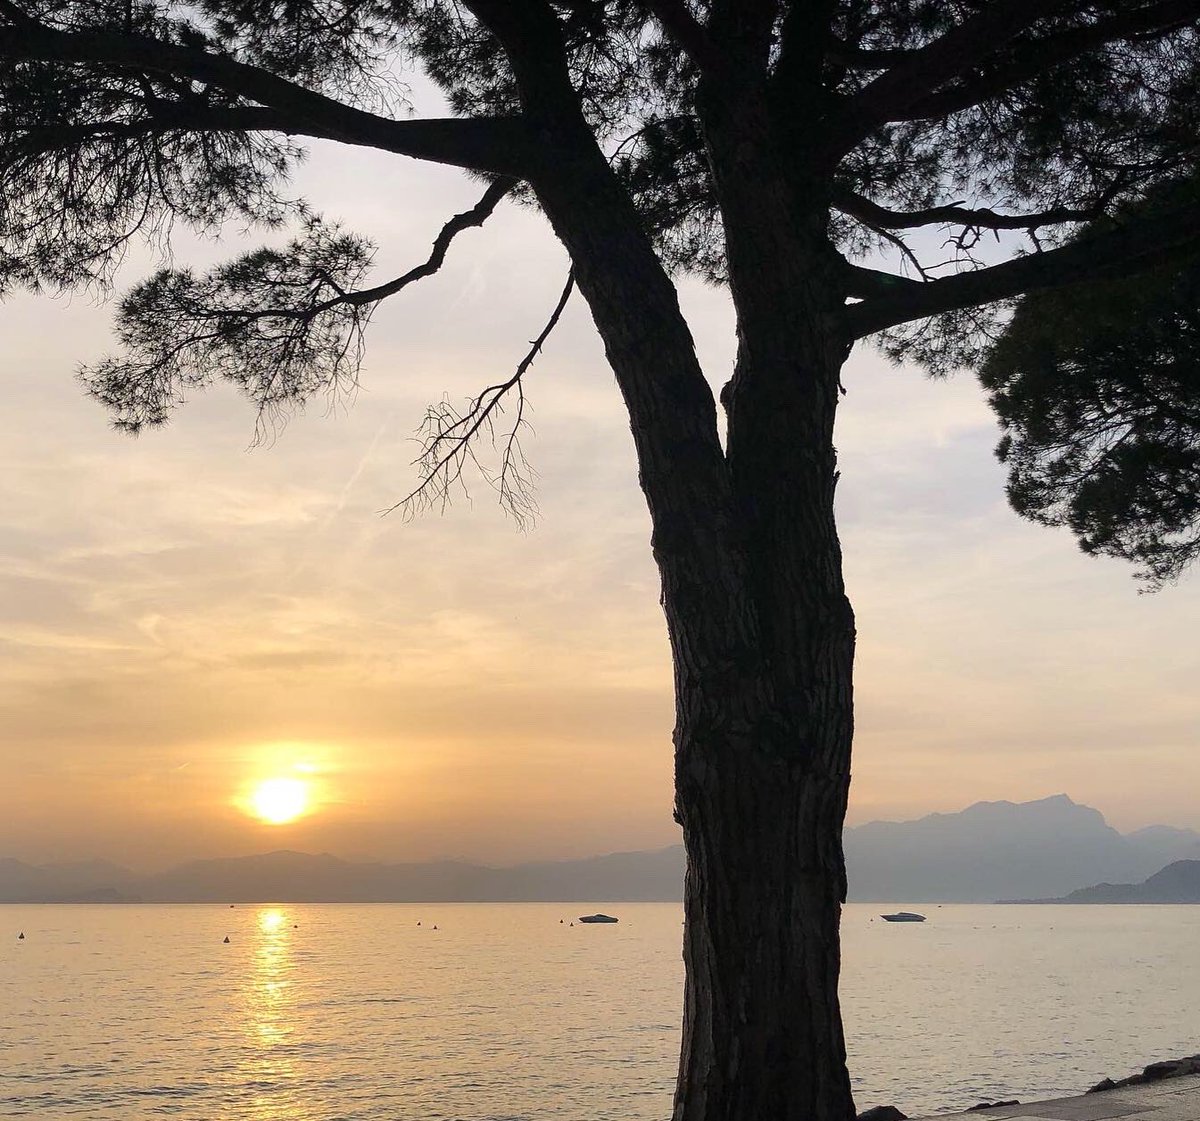 The ethereal beauty of a sunset in Lazise, Lake Garda. #sunset, #sunsetphotography, #lakegarda, #lakegardaitaly, #lakegardaphotography, #lazise, #lazisesulgarda, #sunsetinlazise, #lakegardasunset